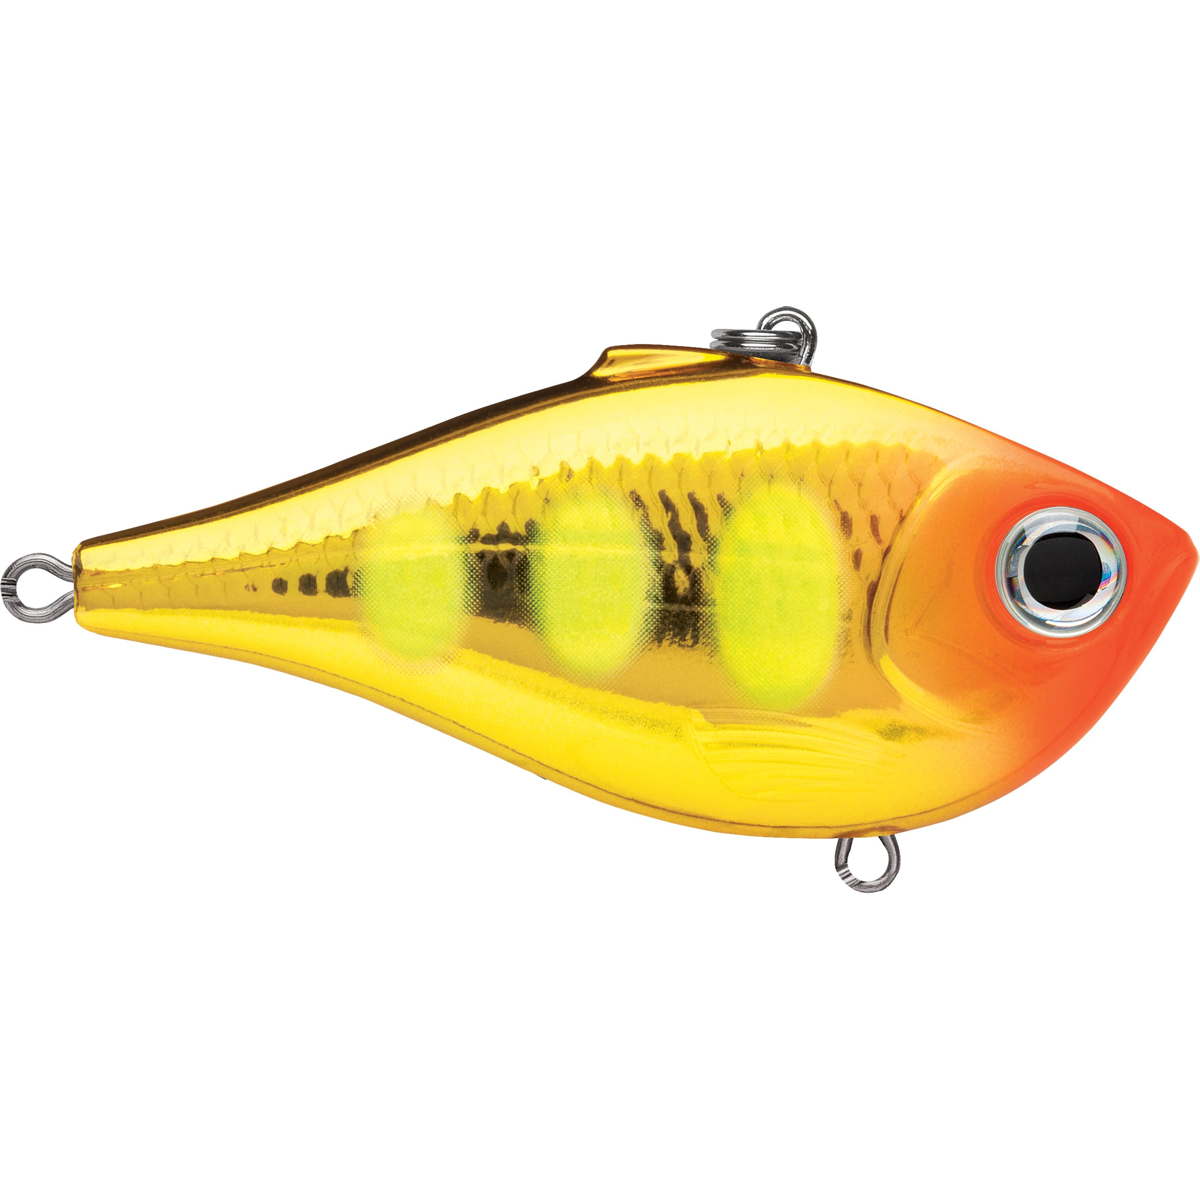 Photo of Rapala Rippin Rap for sale at United Tackle Shops.